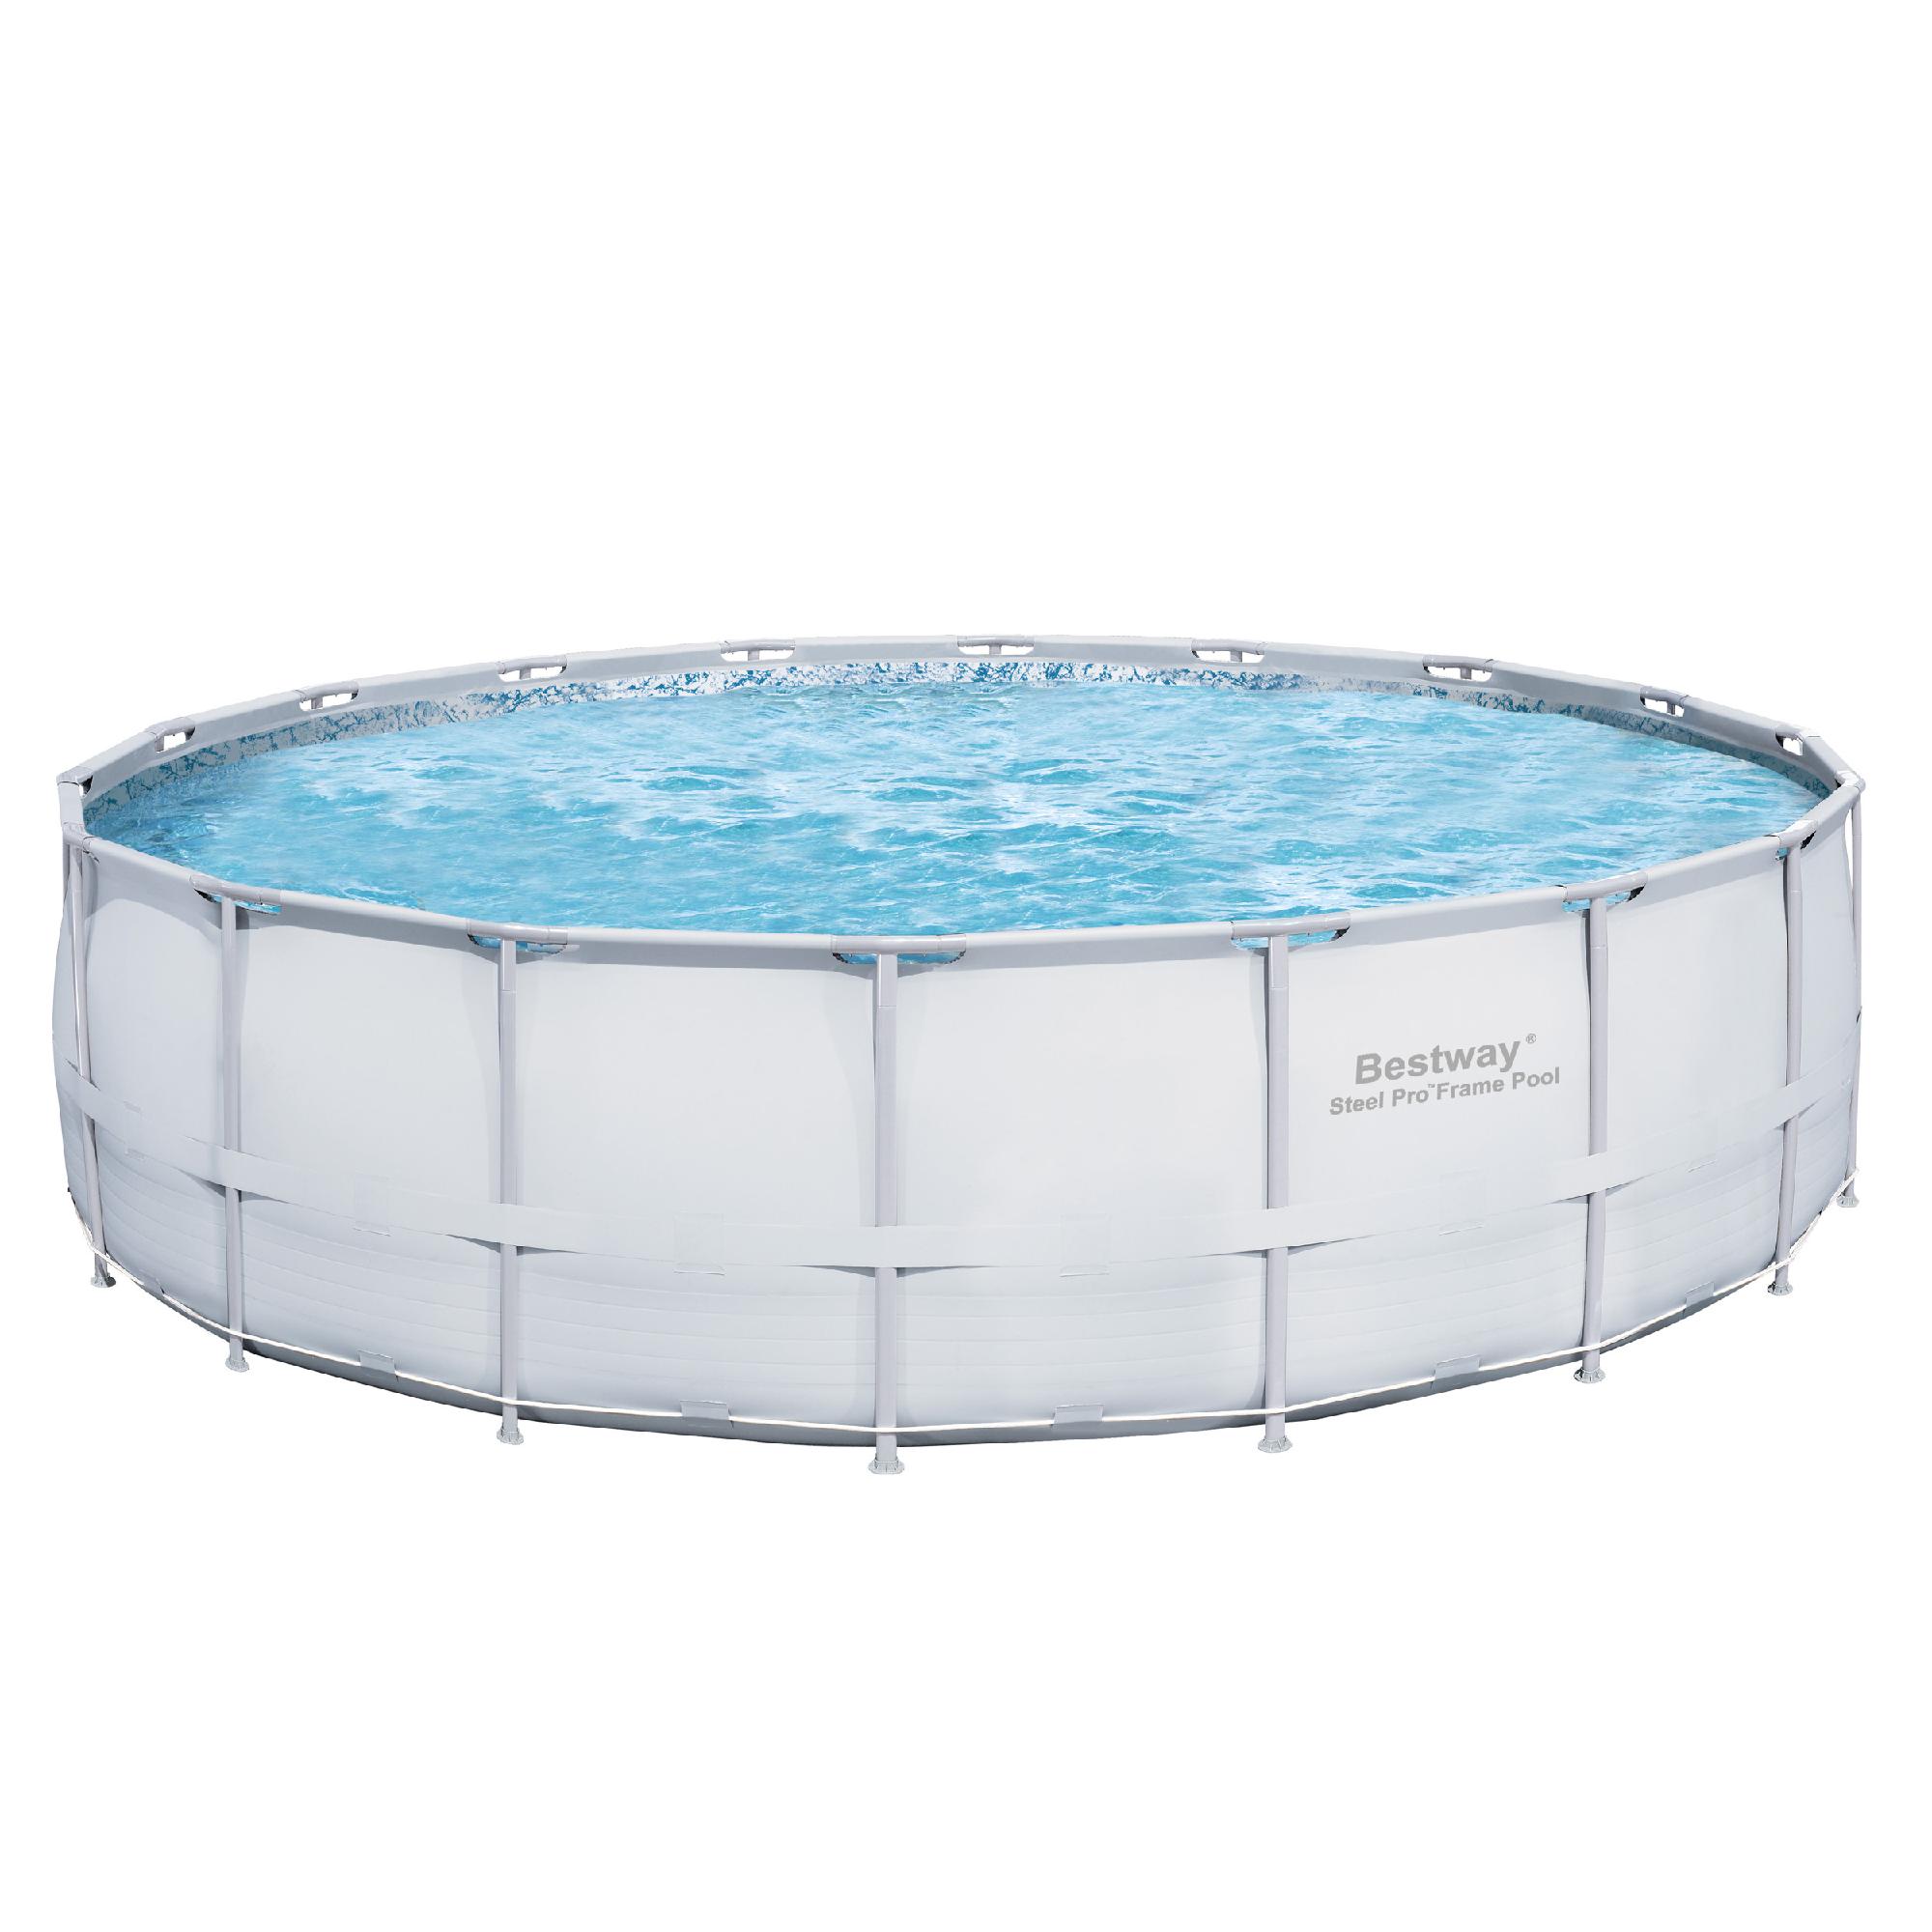 UPC 821808127535 product image for Bestway Steel Pro Frame Pool - 18' Diameter x 52